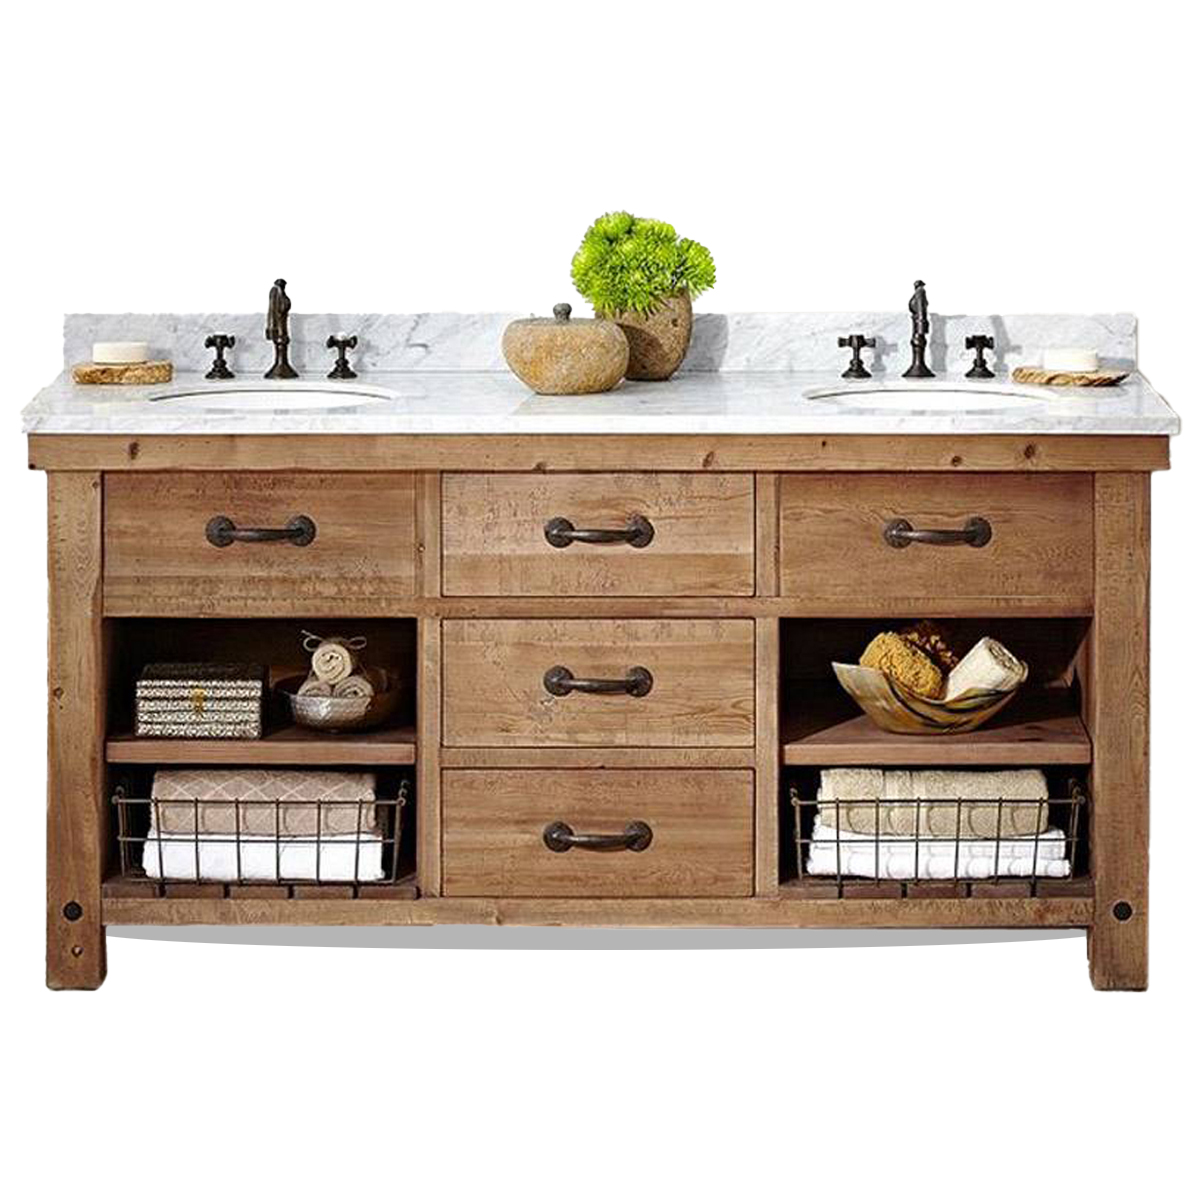 Double trough sink washstand